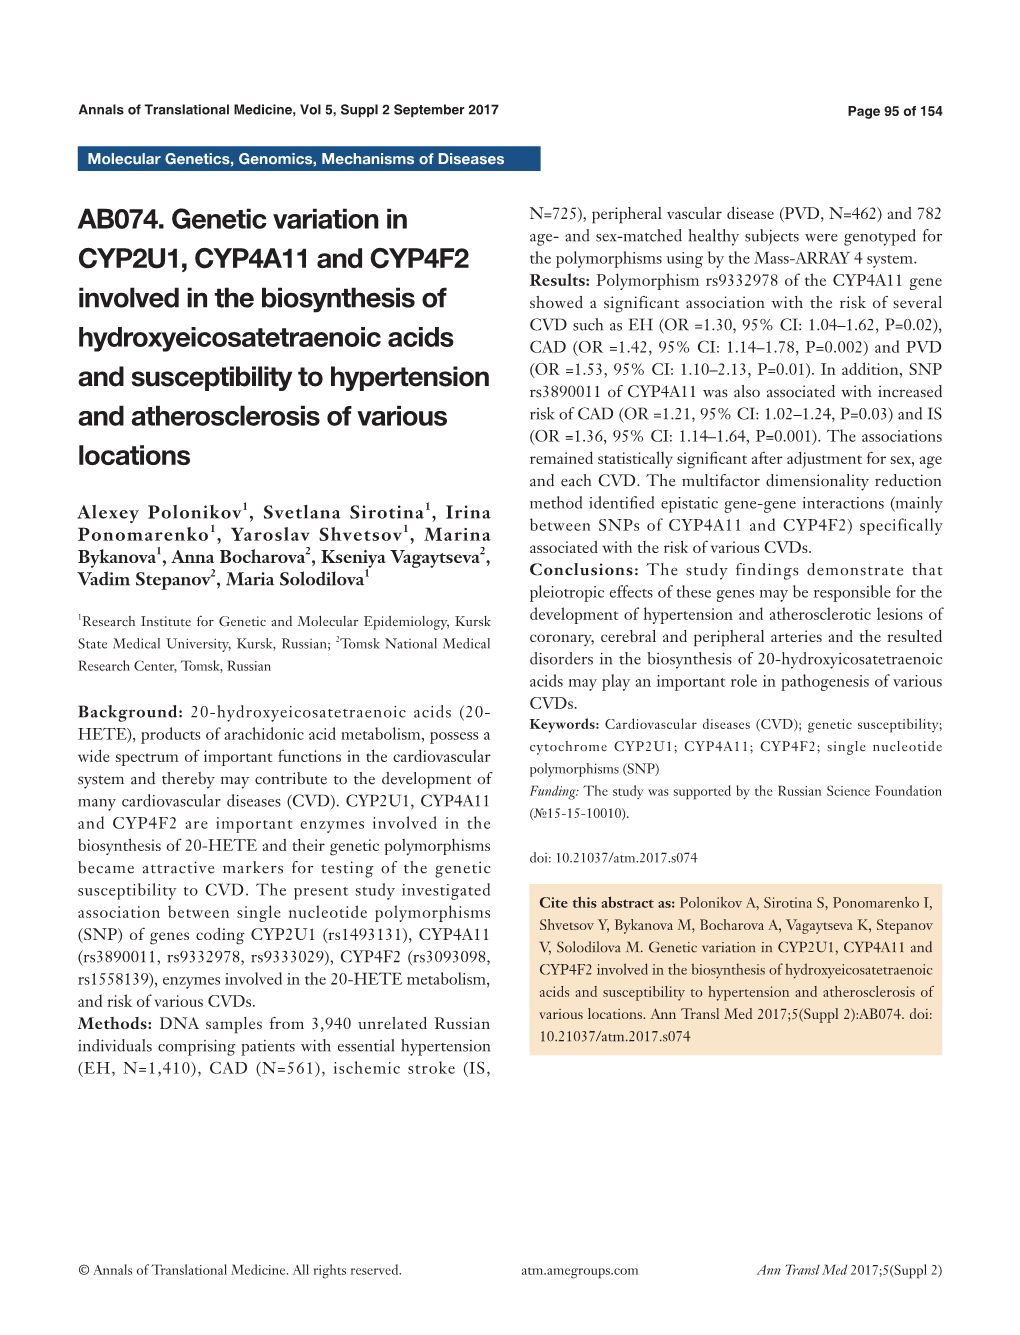 AB074. Genetic Variation in CYP2U1, CYP4A11 and CYP4F2 Involved In